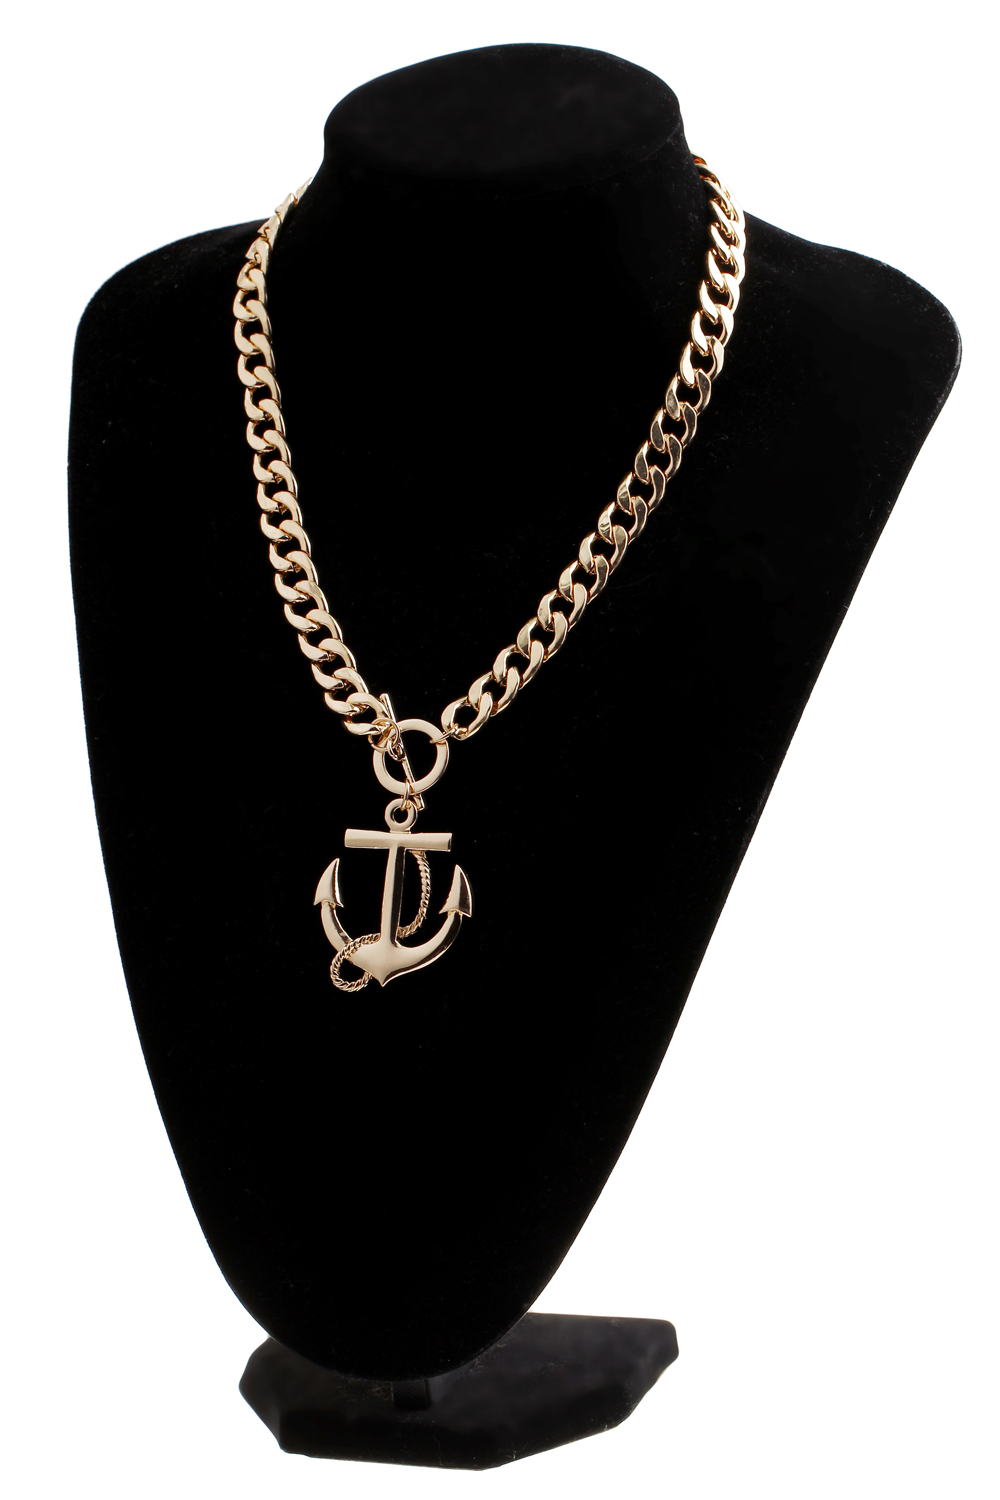 Wholesale promotion fashion necklaces for women 2015 long chain collar big anchor necklace women jewelry bijouterie